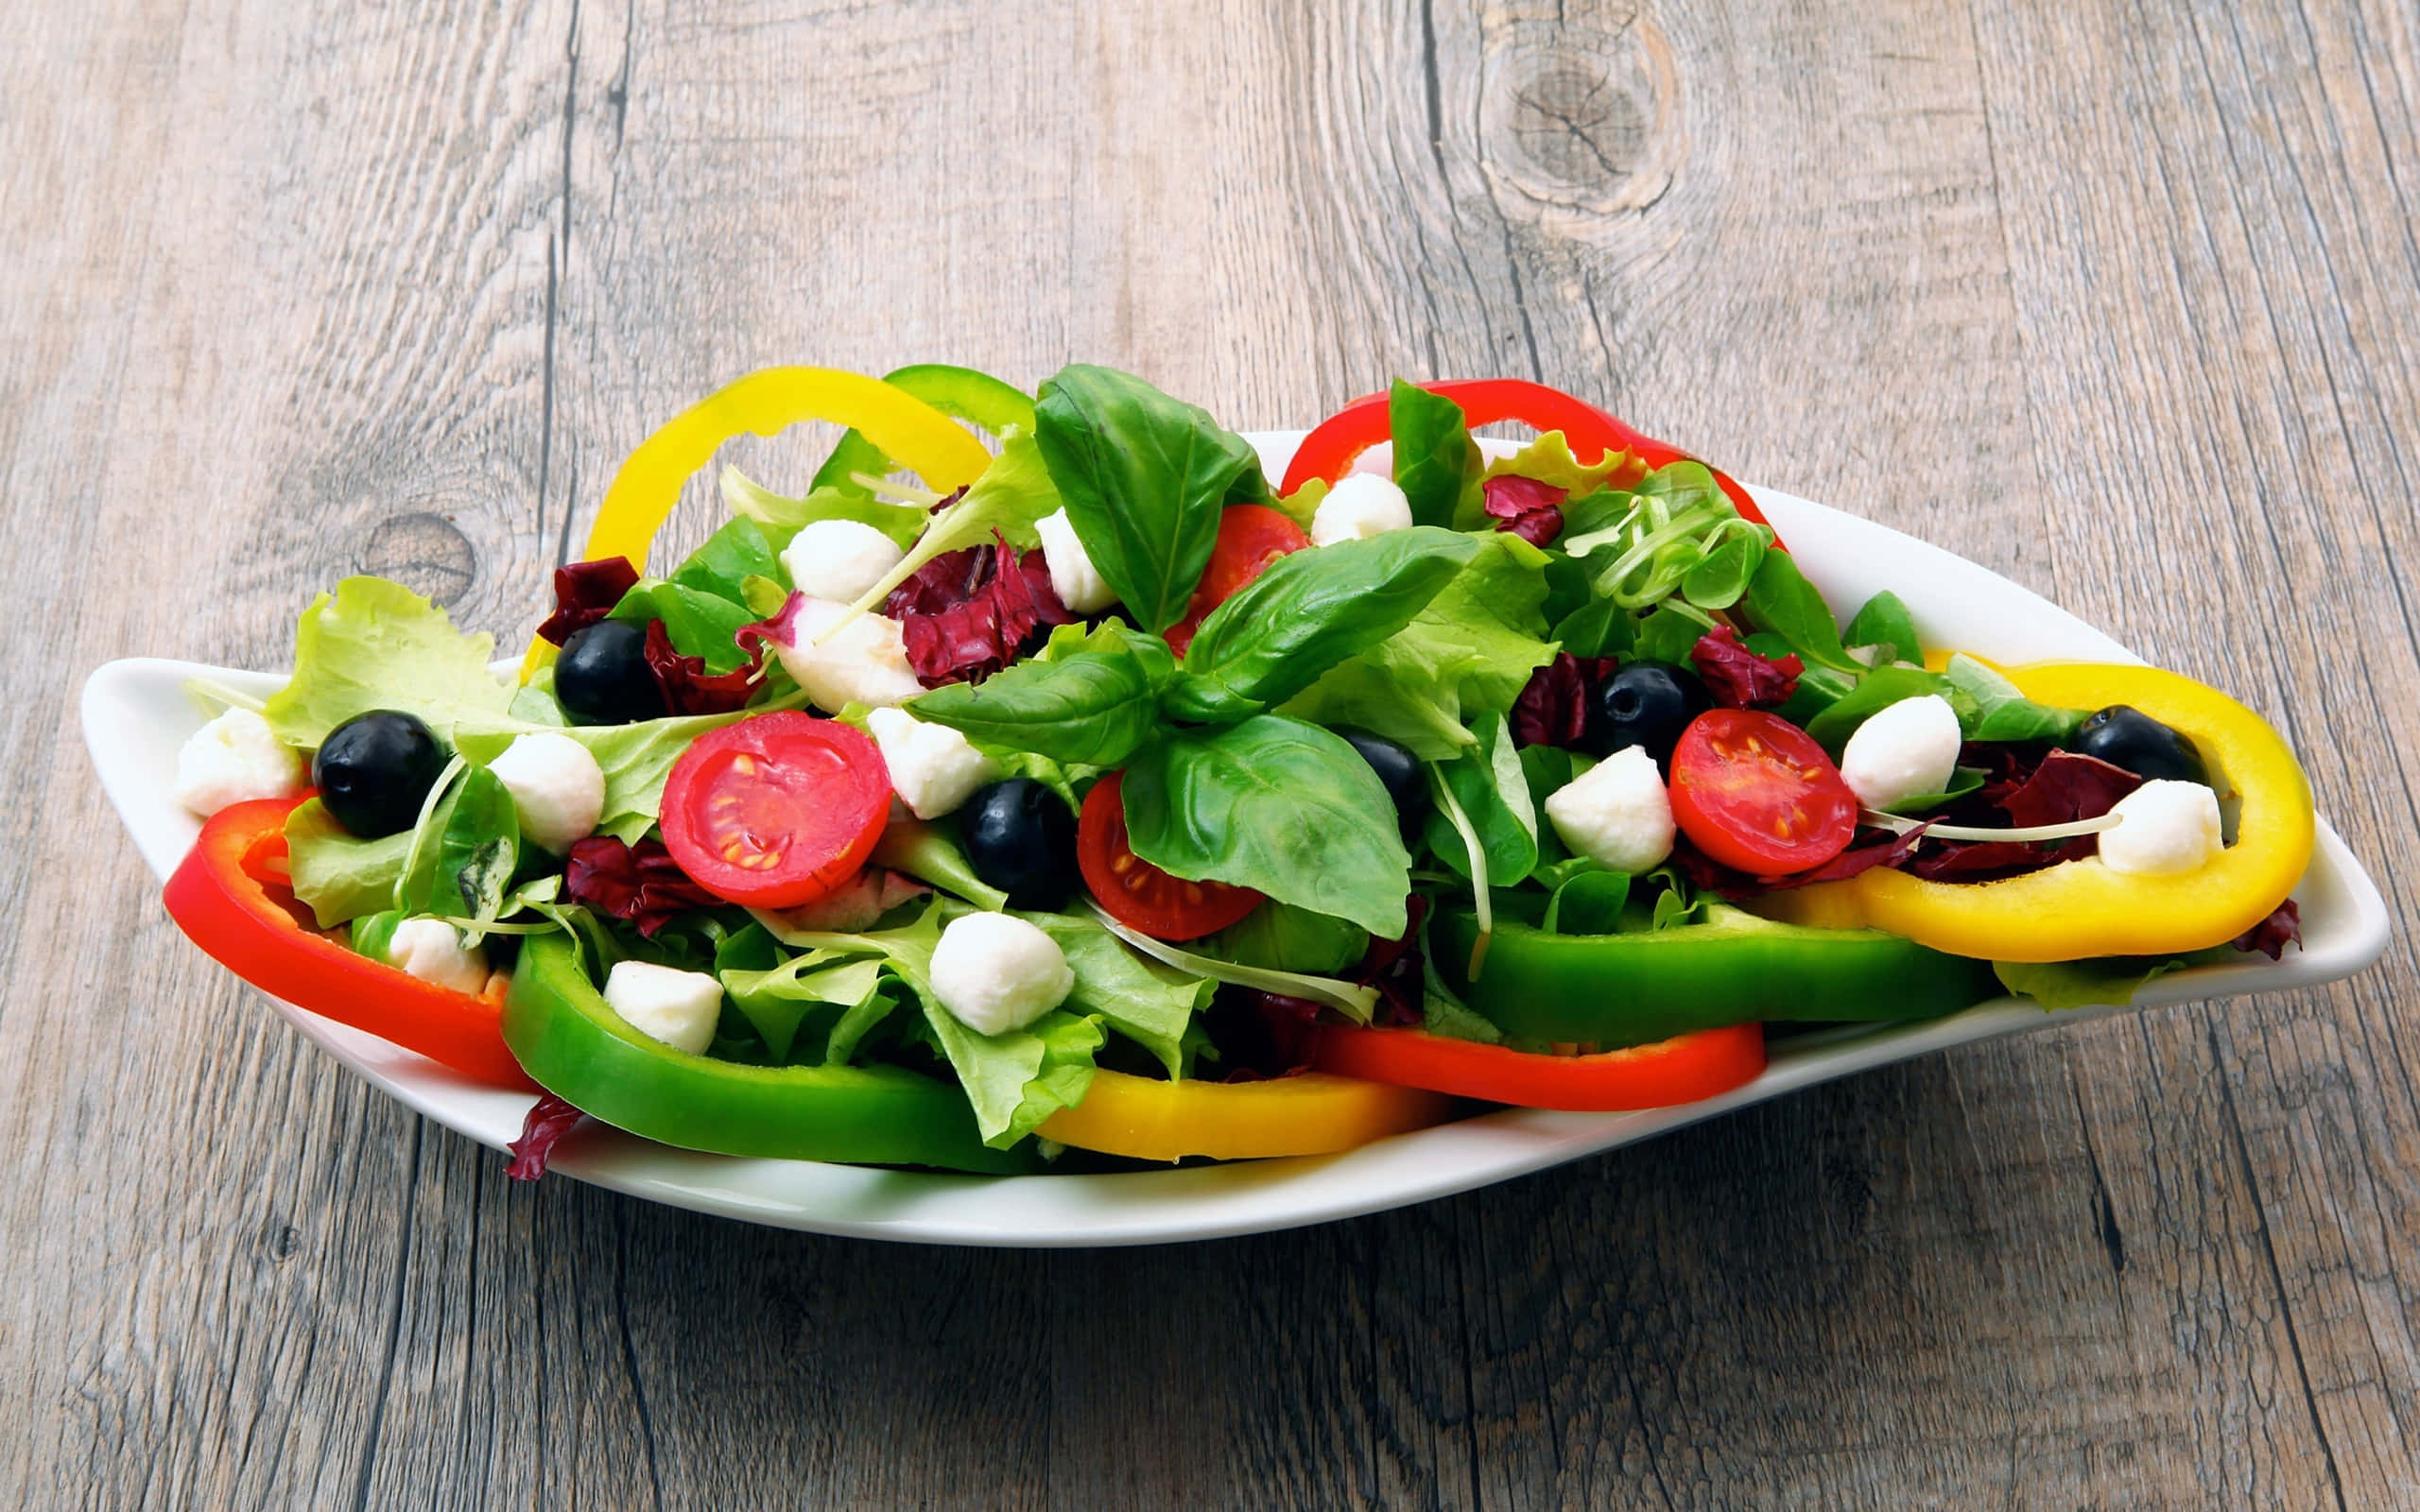 Vibrant Fresh Salad with a Variety of Ingredients